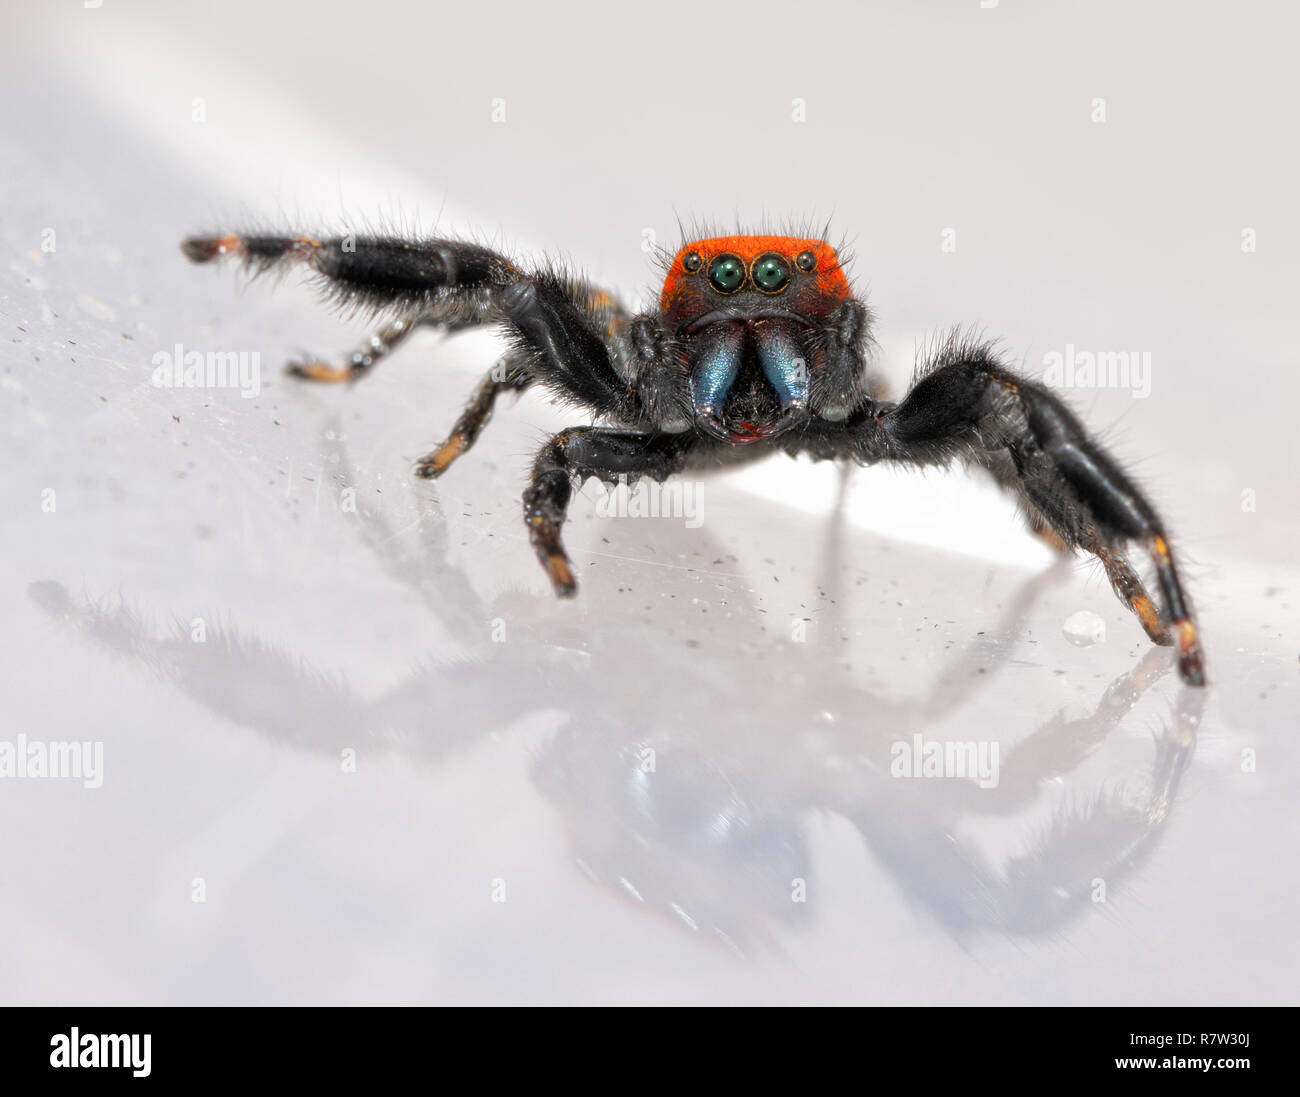 Comical image of a super cute, red and black Phidippus cardinalis, the Cardinal Jumping Spider, with his beautiful blue chelicerae exposed Stock Photo